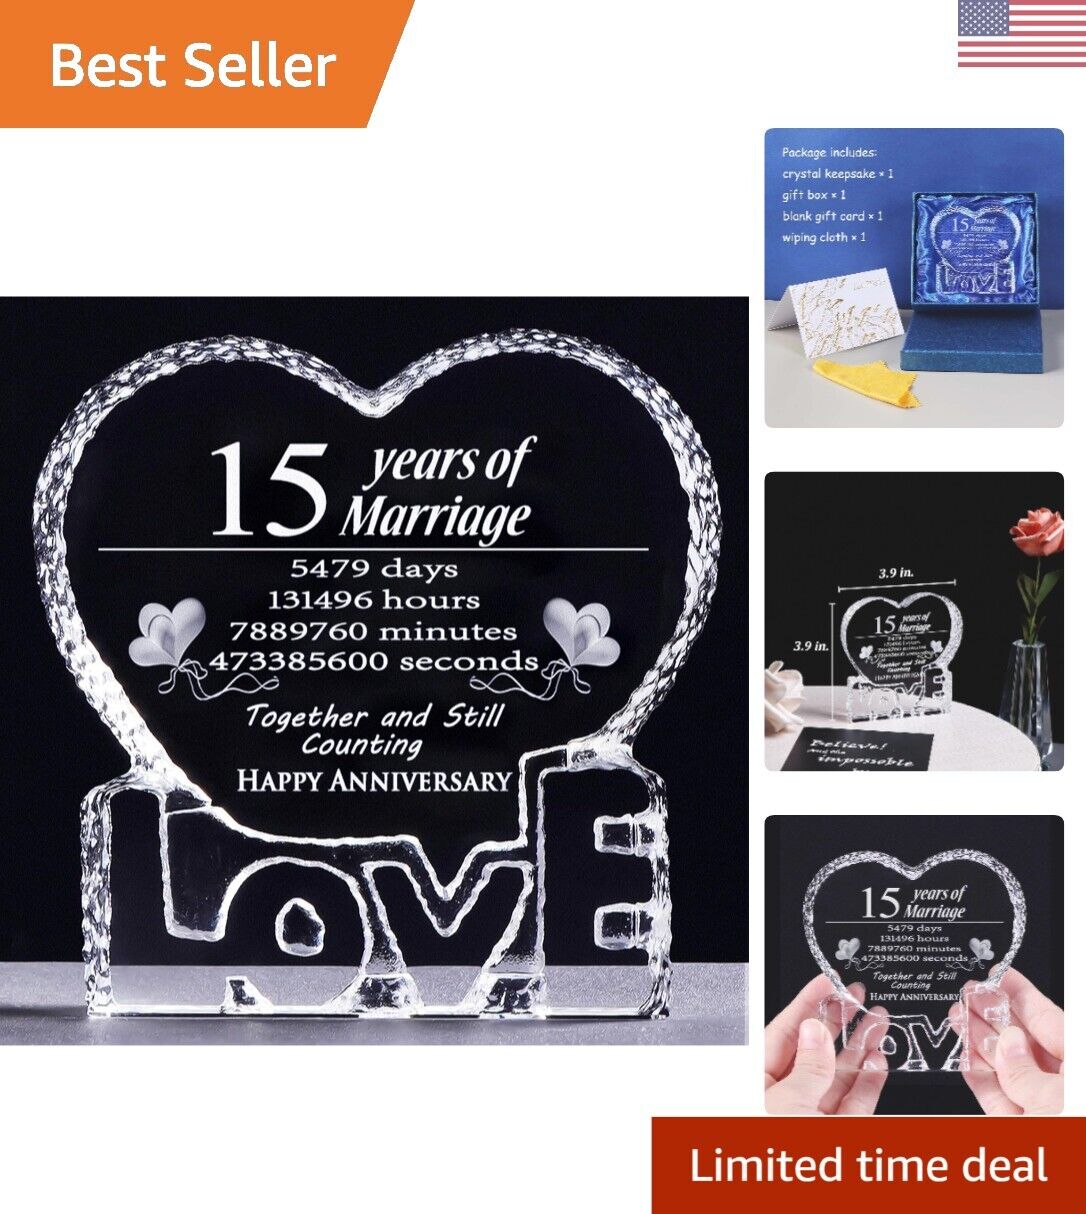 Personalized 15th Anniversary Crystal Paperweight - Meaningful Gift for Her